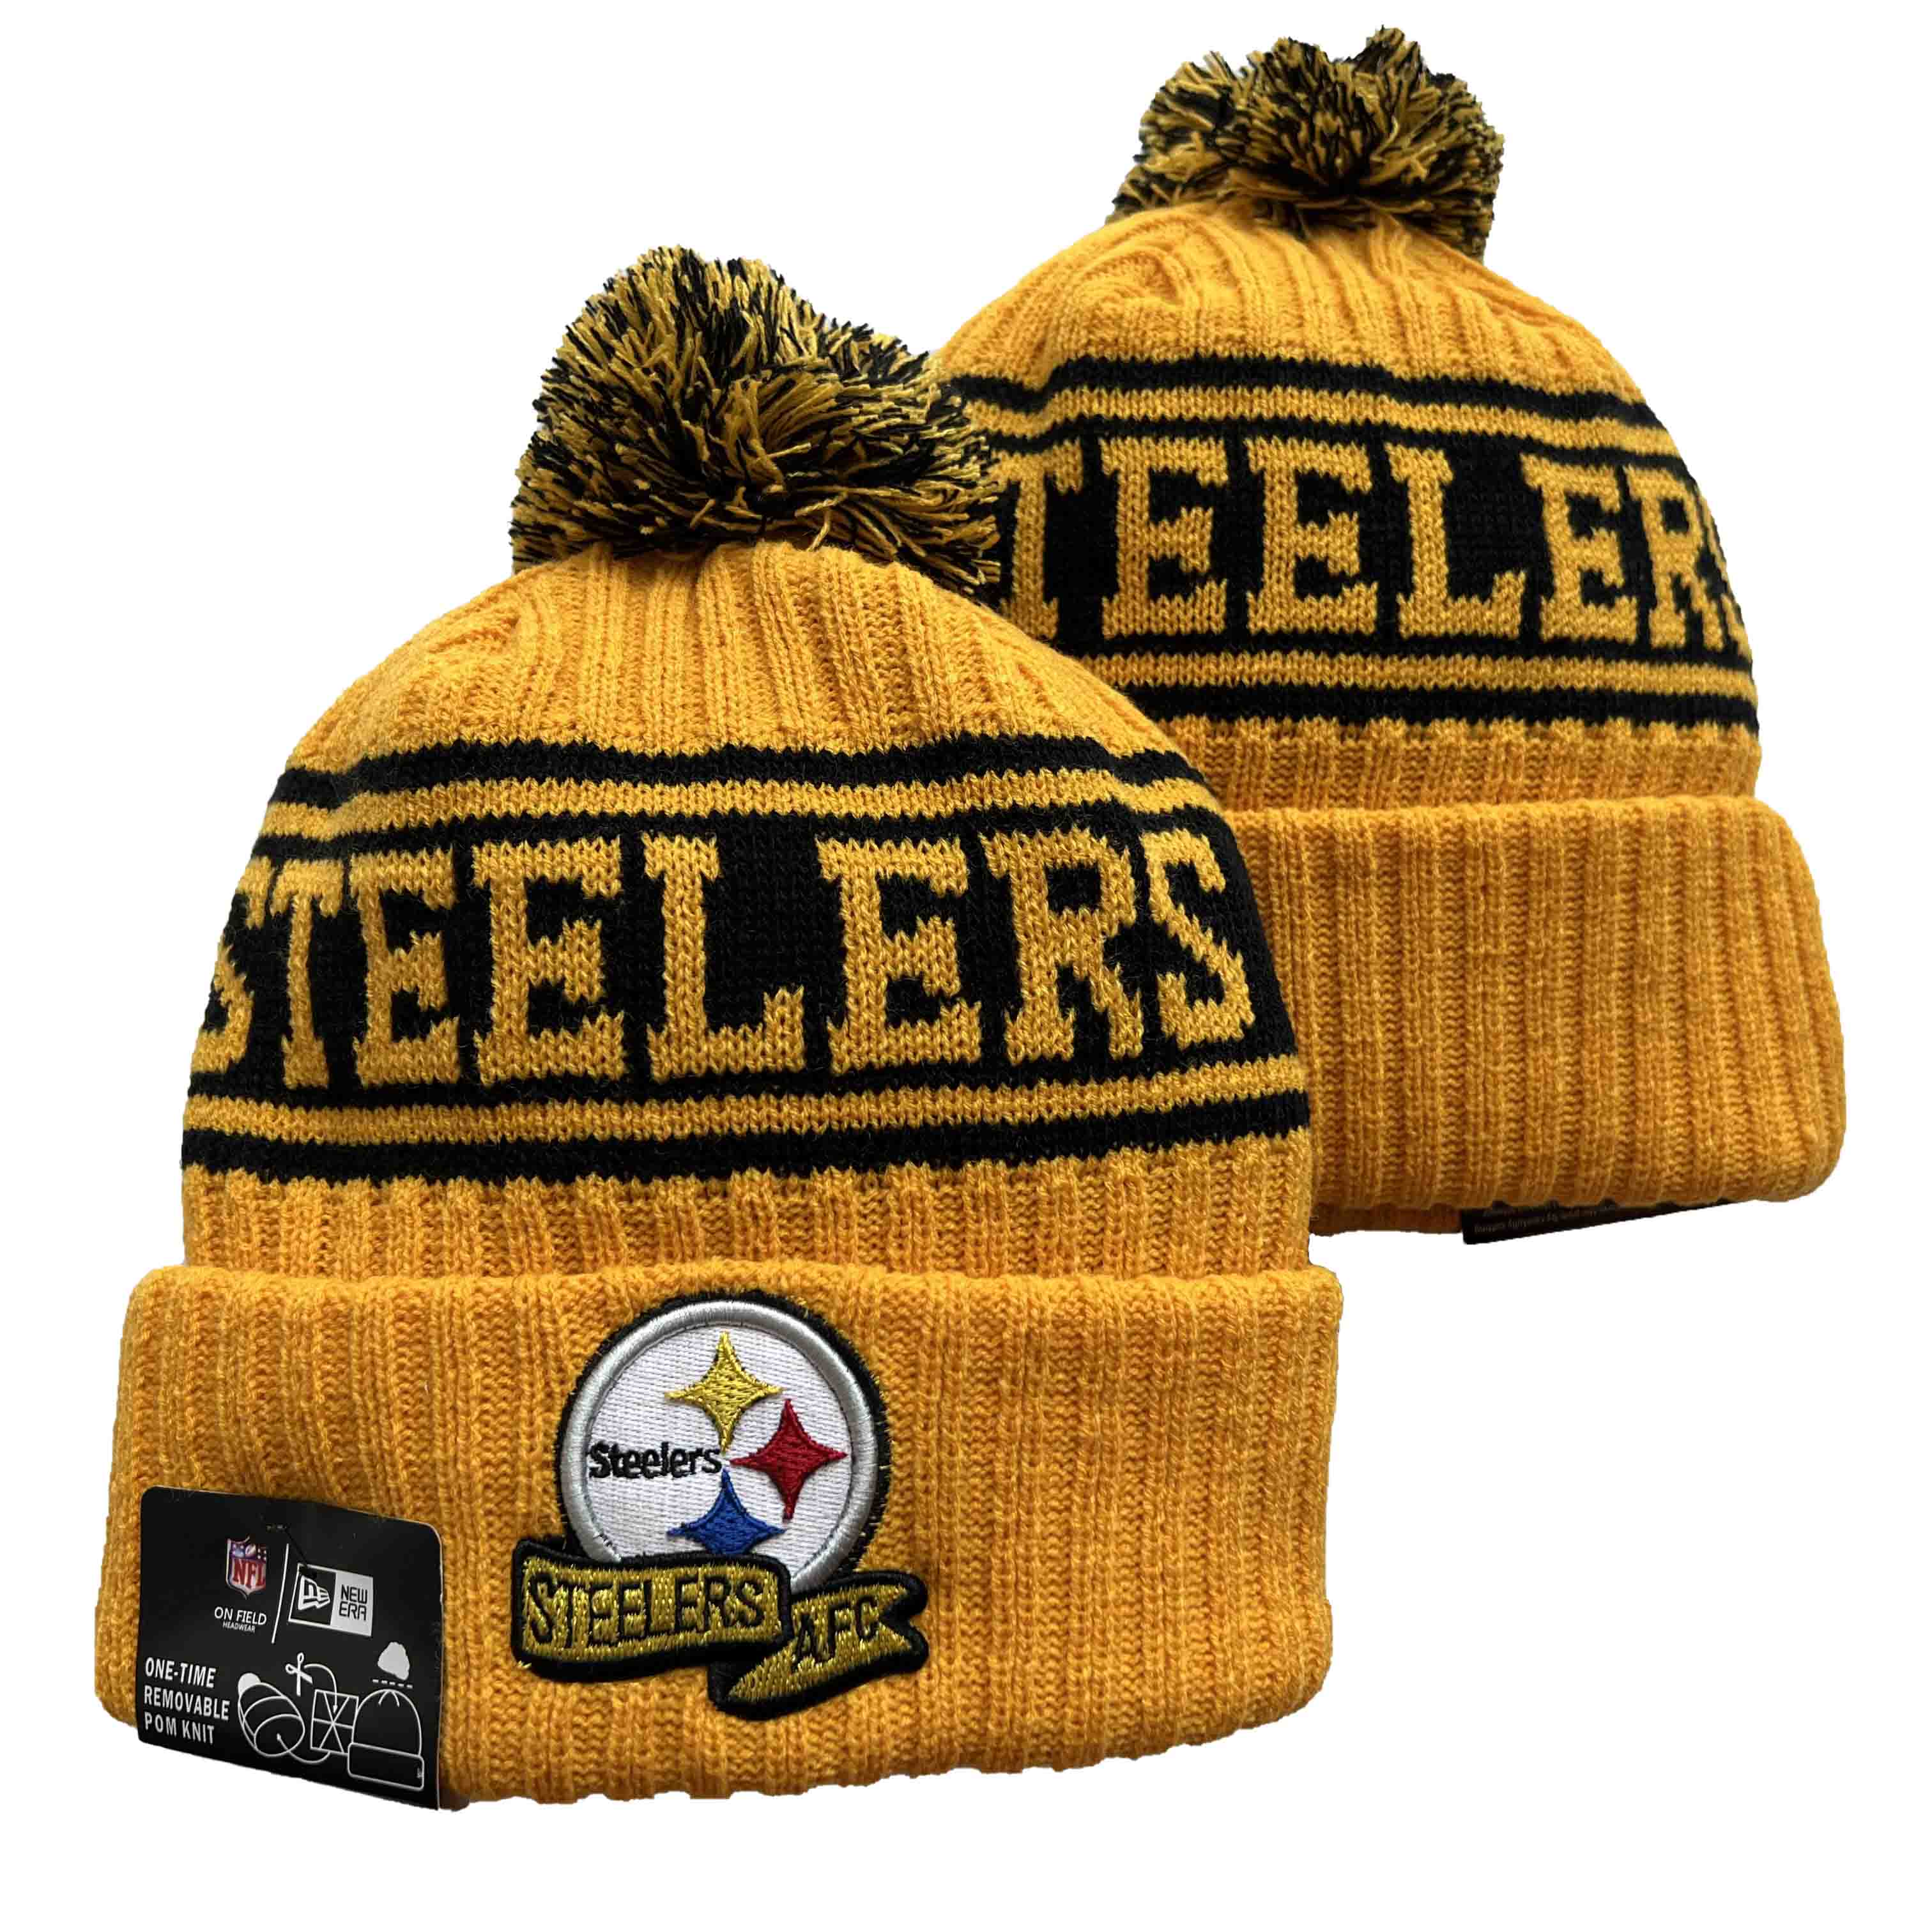 NFL Pittsburgh Steelers Beanies Knit Hats-YD1154